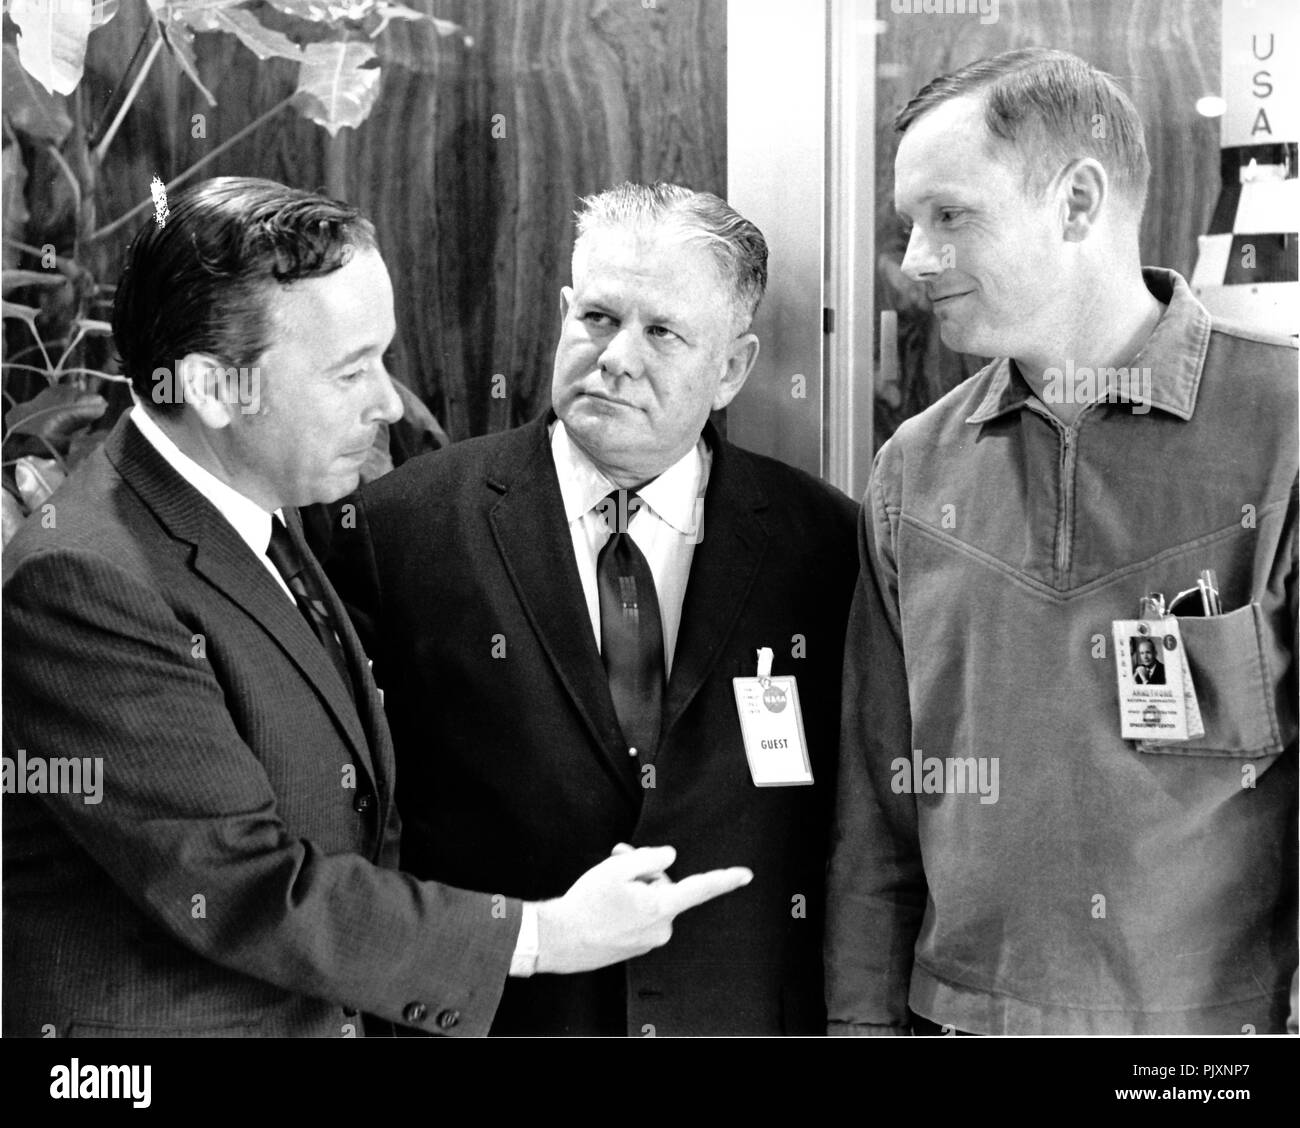 Cape Canaveral, FL - (FILE) -- United States Representative Bert Podell (Democrat of New York), left, speaks with U.S. Representative Olin E. Teague (Democrat of Texas), Chairman of the Manned Spaceflight Subcommittee, center, and Neil A. Armstrong, Apollo 11 mission commander, right, on February 28, 1969.  Credit: NASA via CNP /MediaPunch Stock Photo